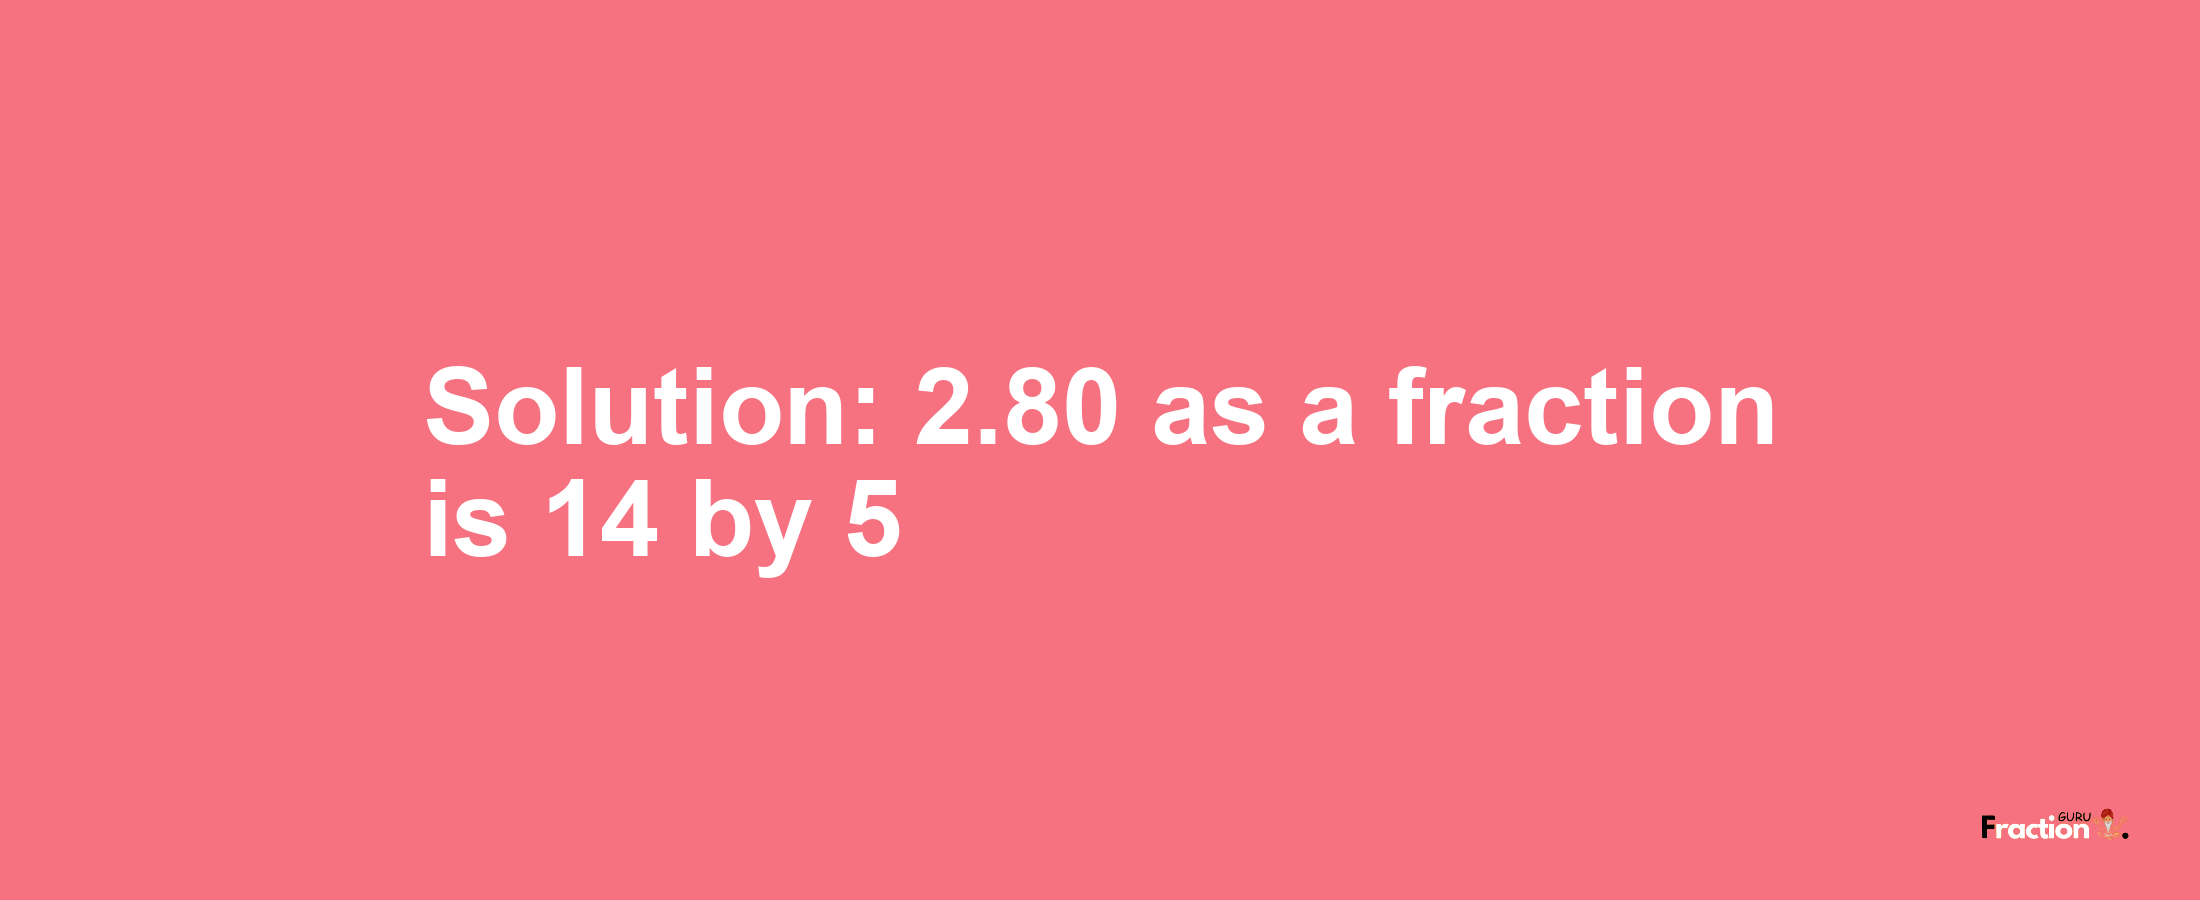 Solution:2.80 as a fraction is 14/5